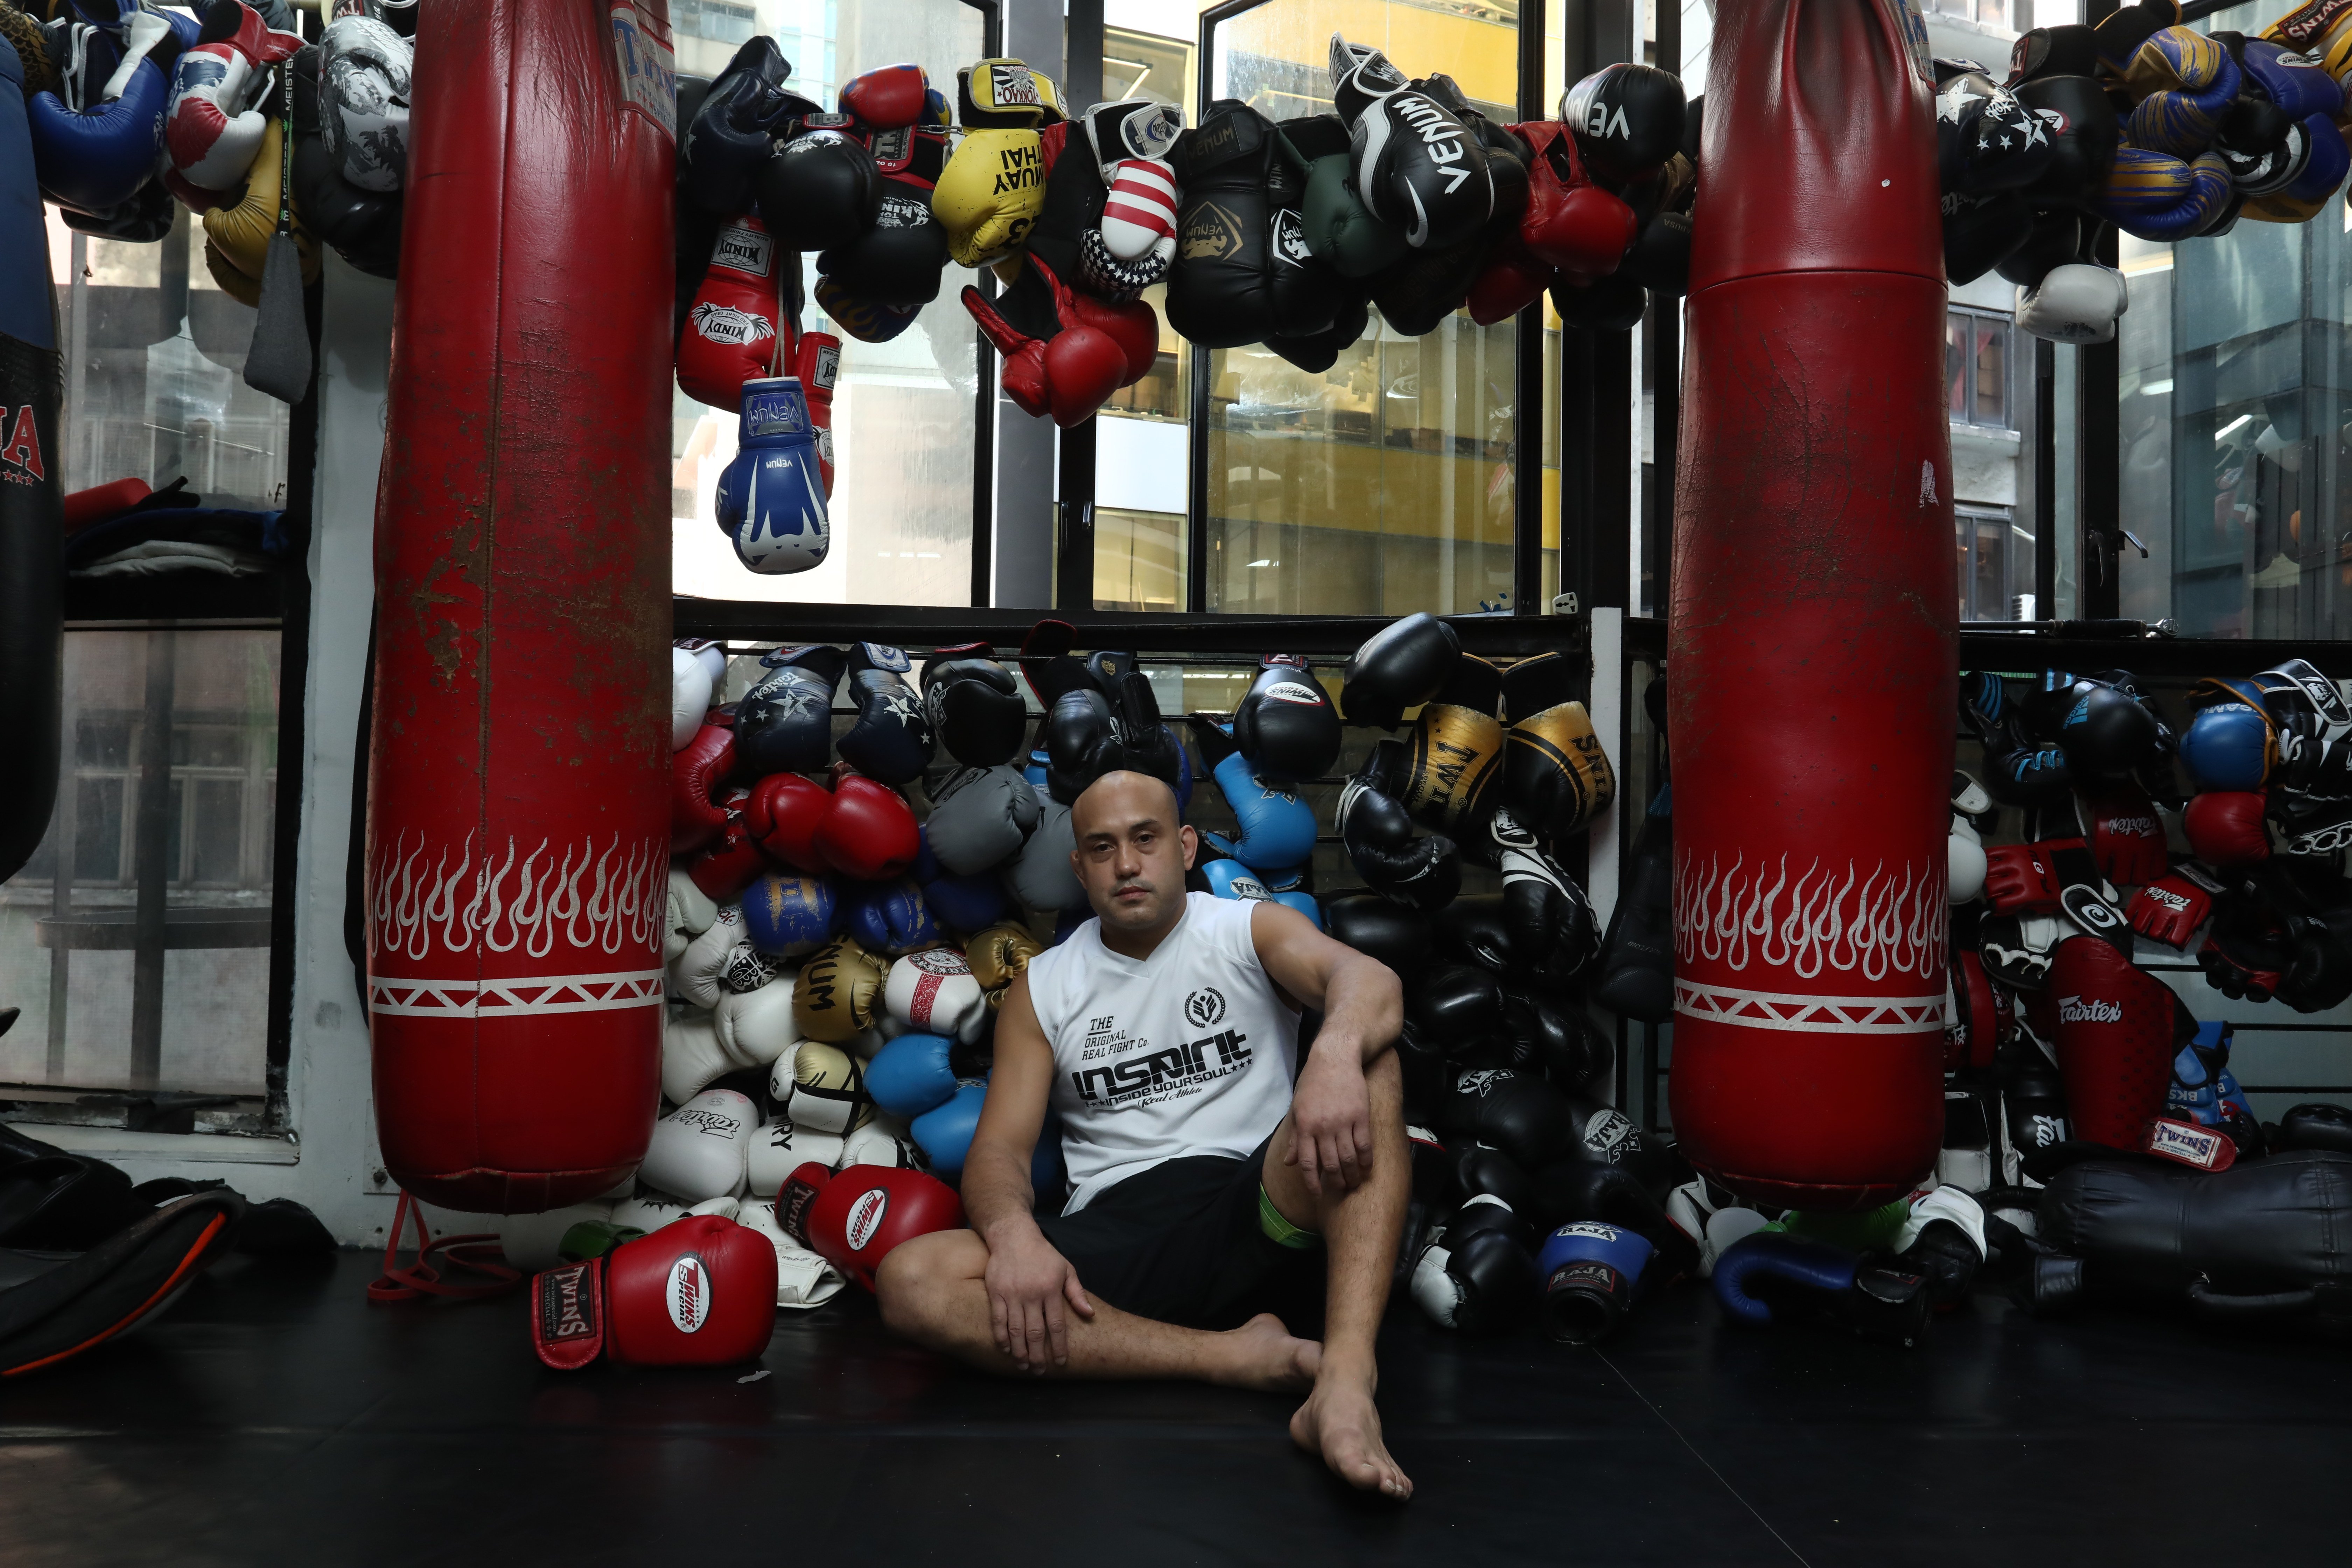 Hong Kong coach Sean Stolarczyk said there is a fine art to coaching and teaching mixed martial arts. Photo: Jonathan Wong